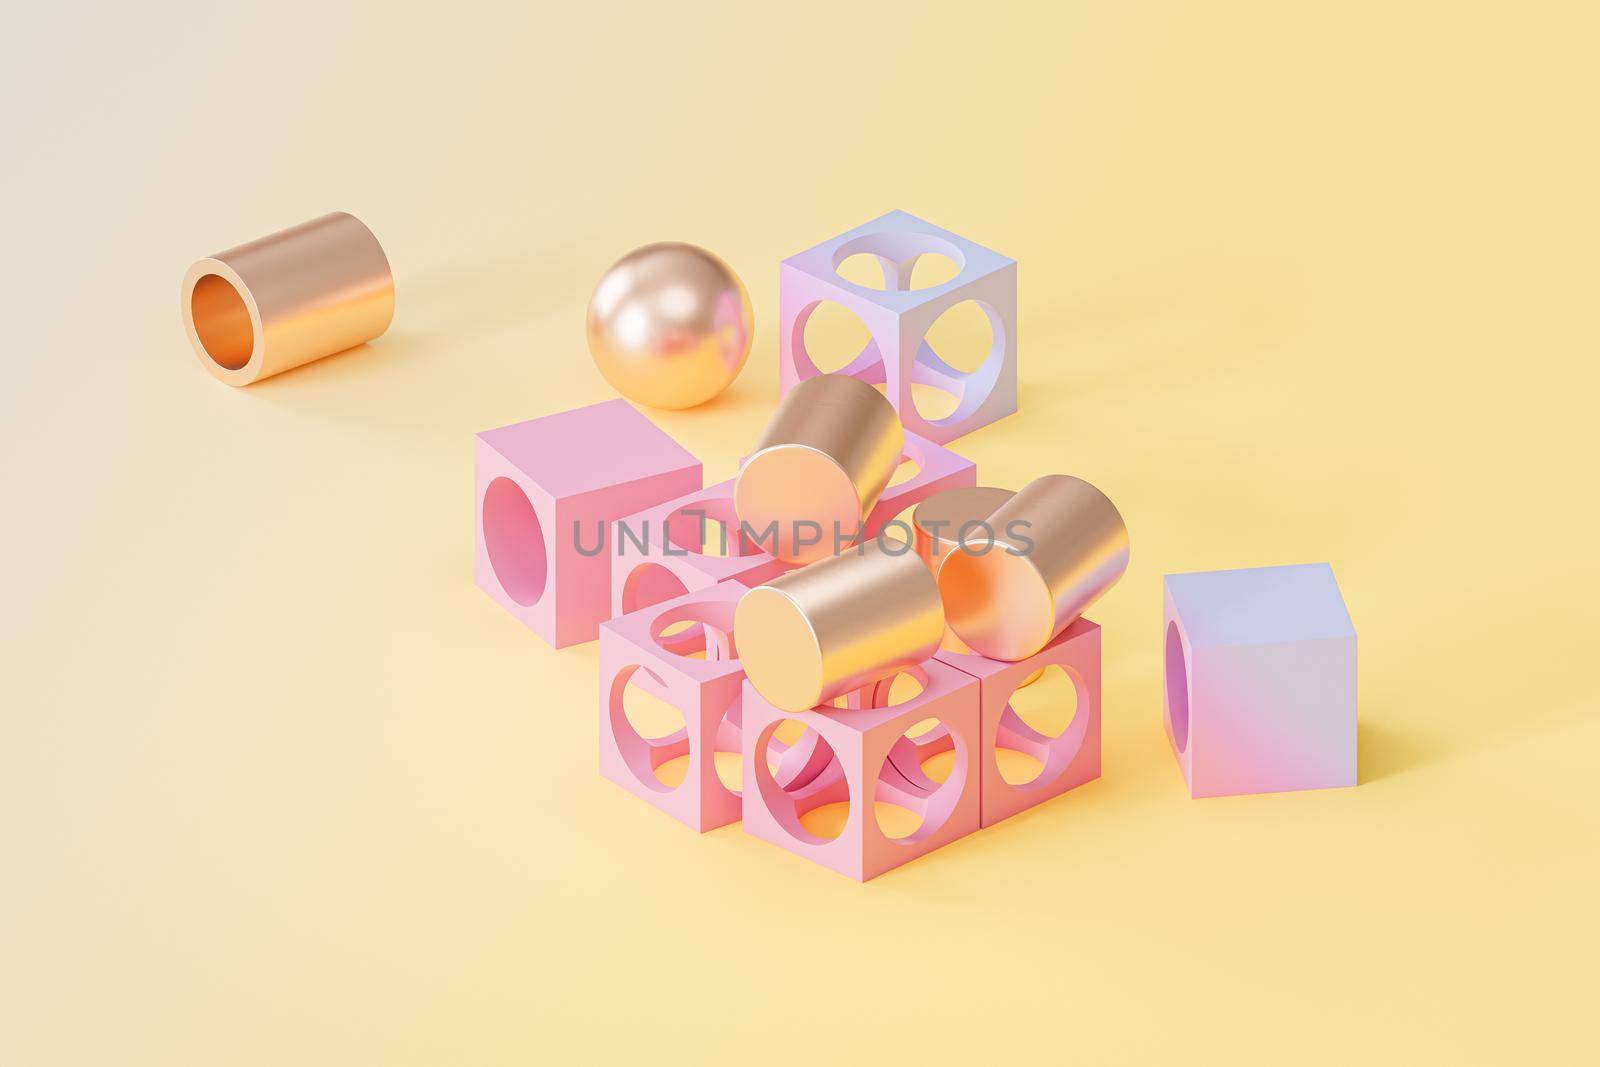 Abstract futuristic cube and cylinder objects on gradient background, minimal 3d render